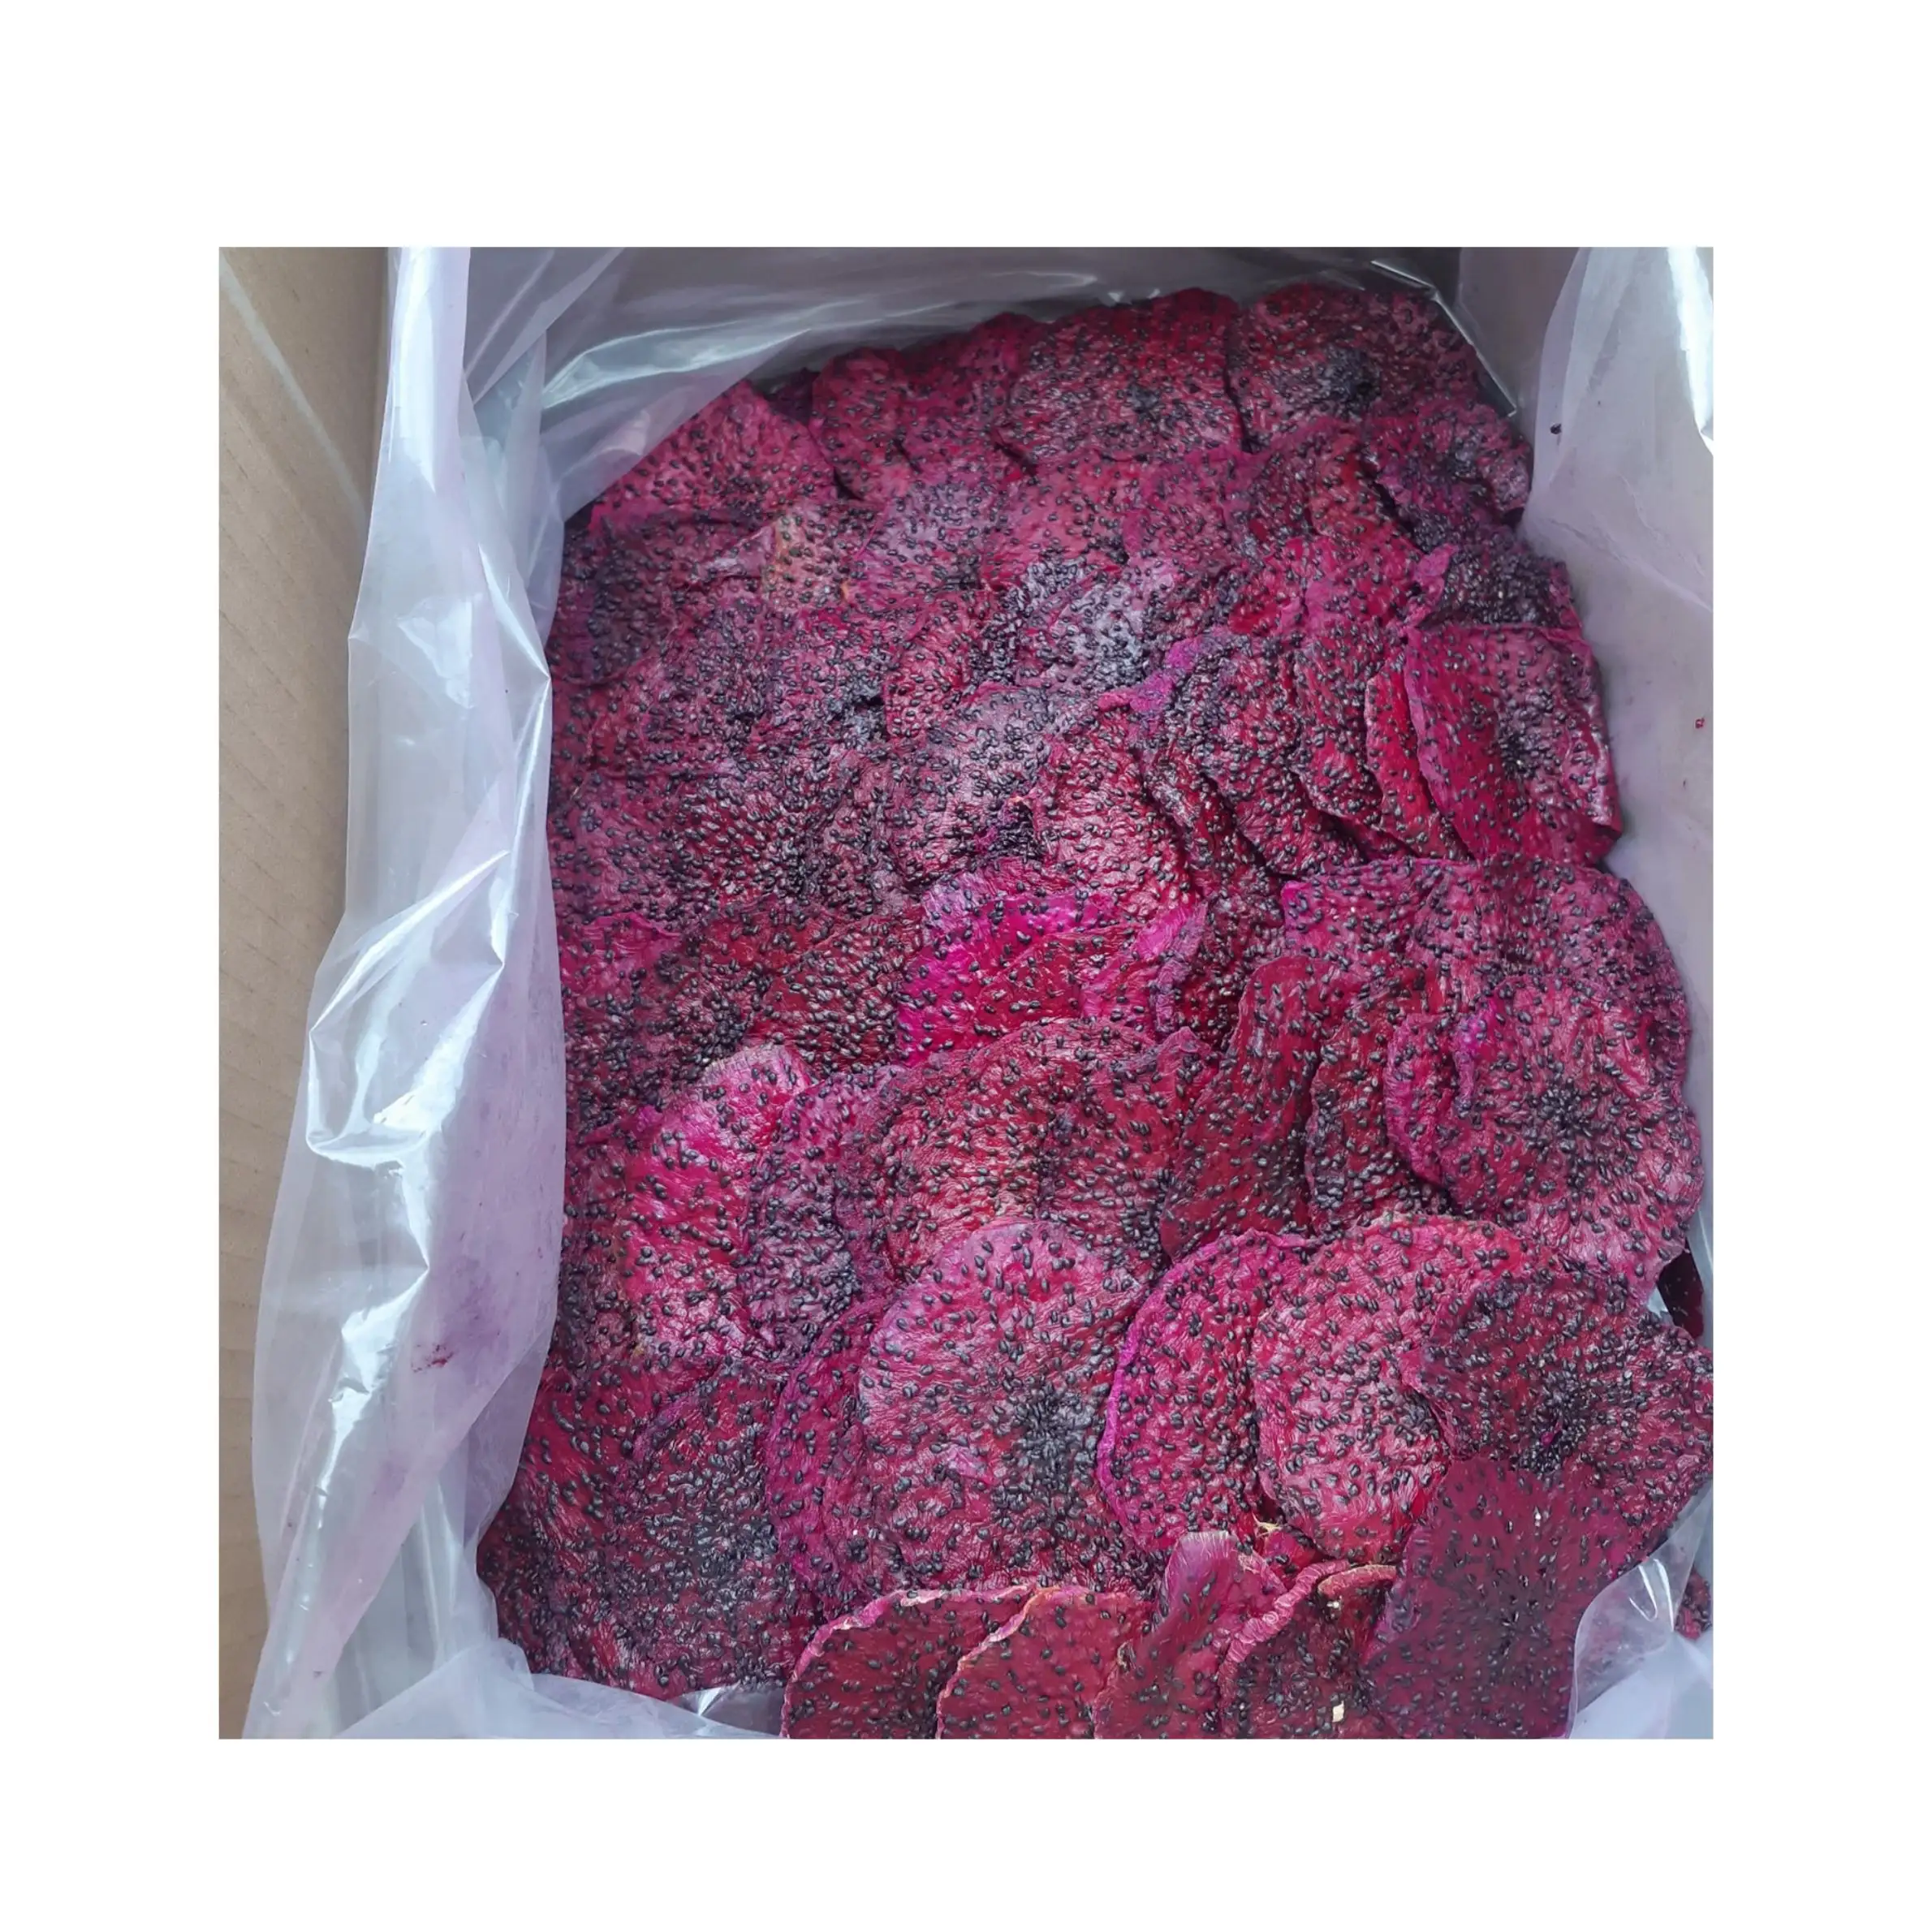 Top Selling organic product 100% natural Dried Dragon Fruits without sugar for export origin Vietnam